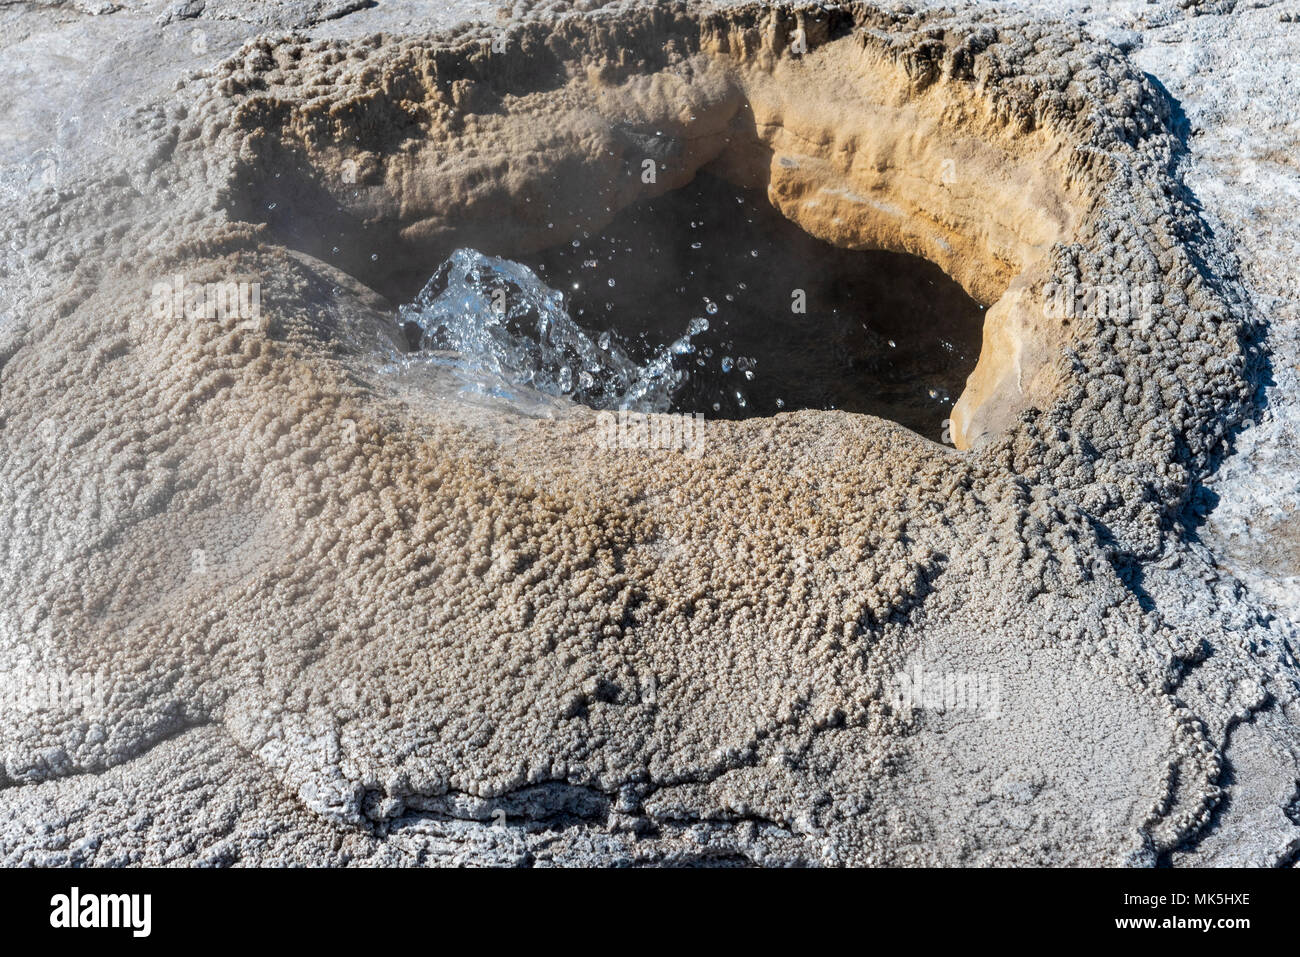 Bubbling hot spring surrounded by mud. Stock Photo